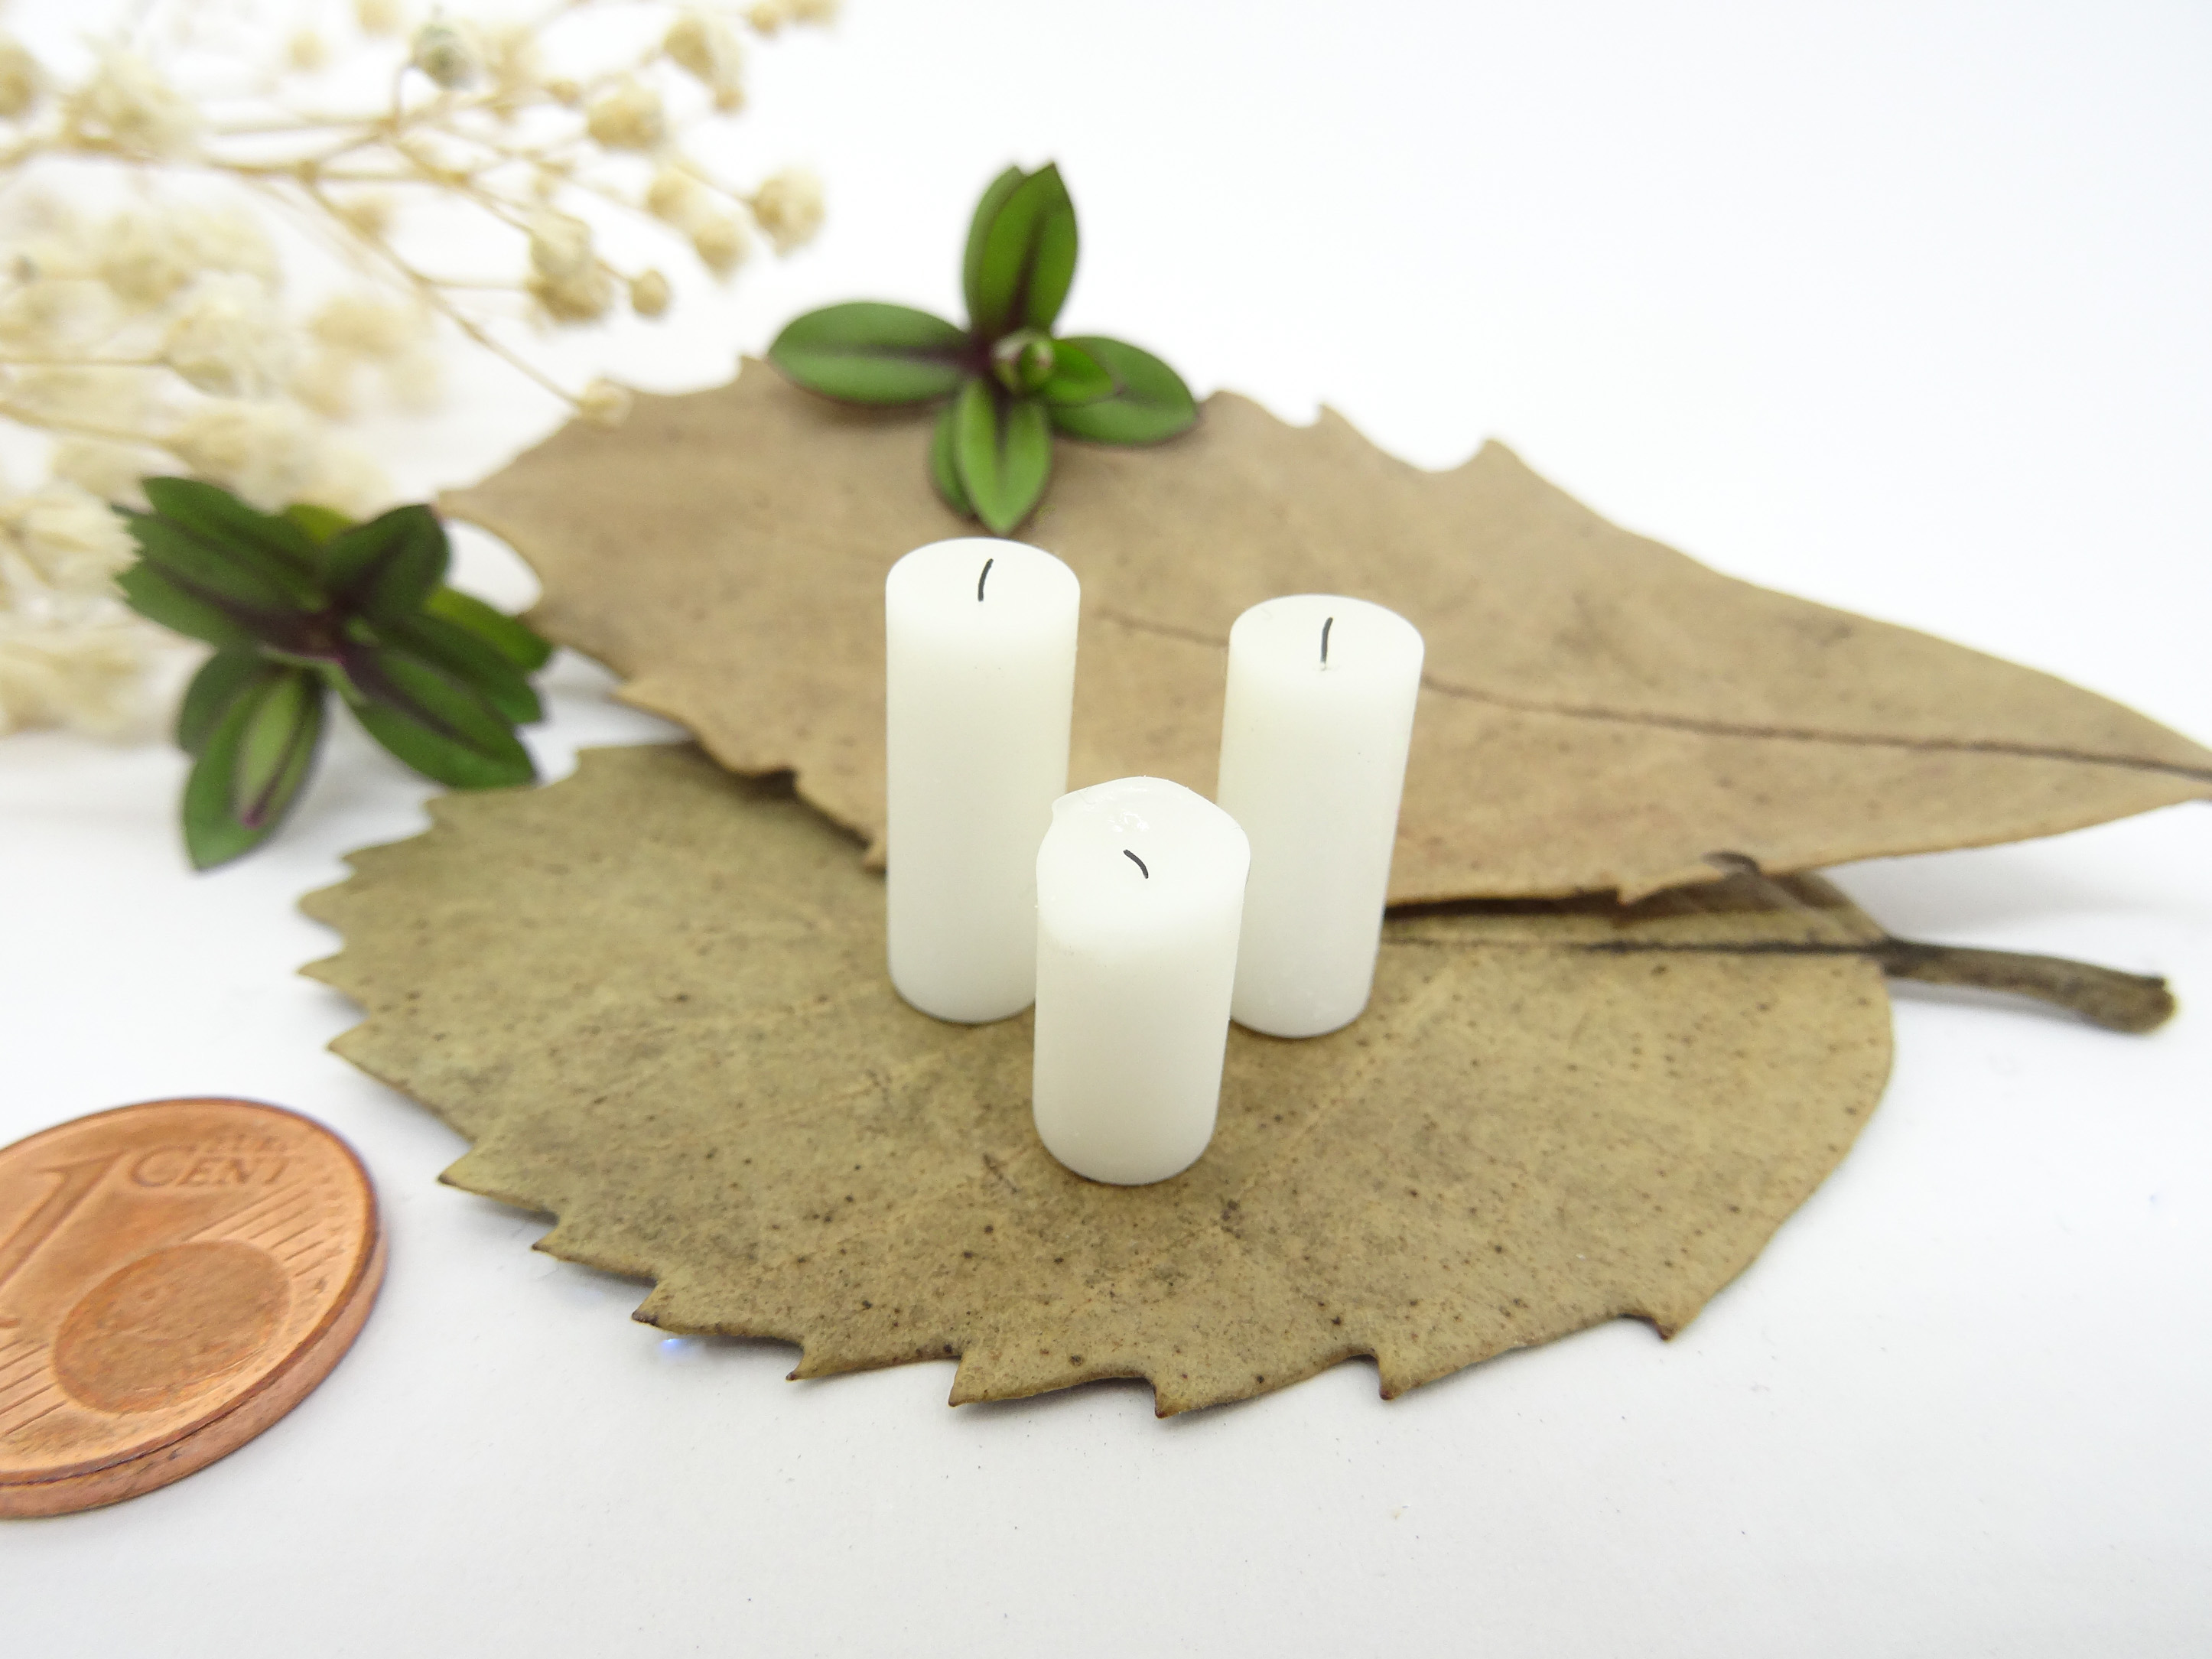 Candles - Set of 3 - 1/12 Miniature